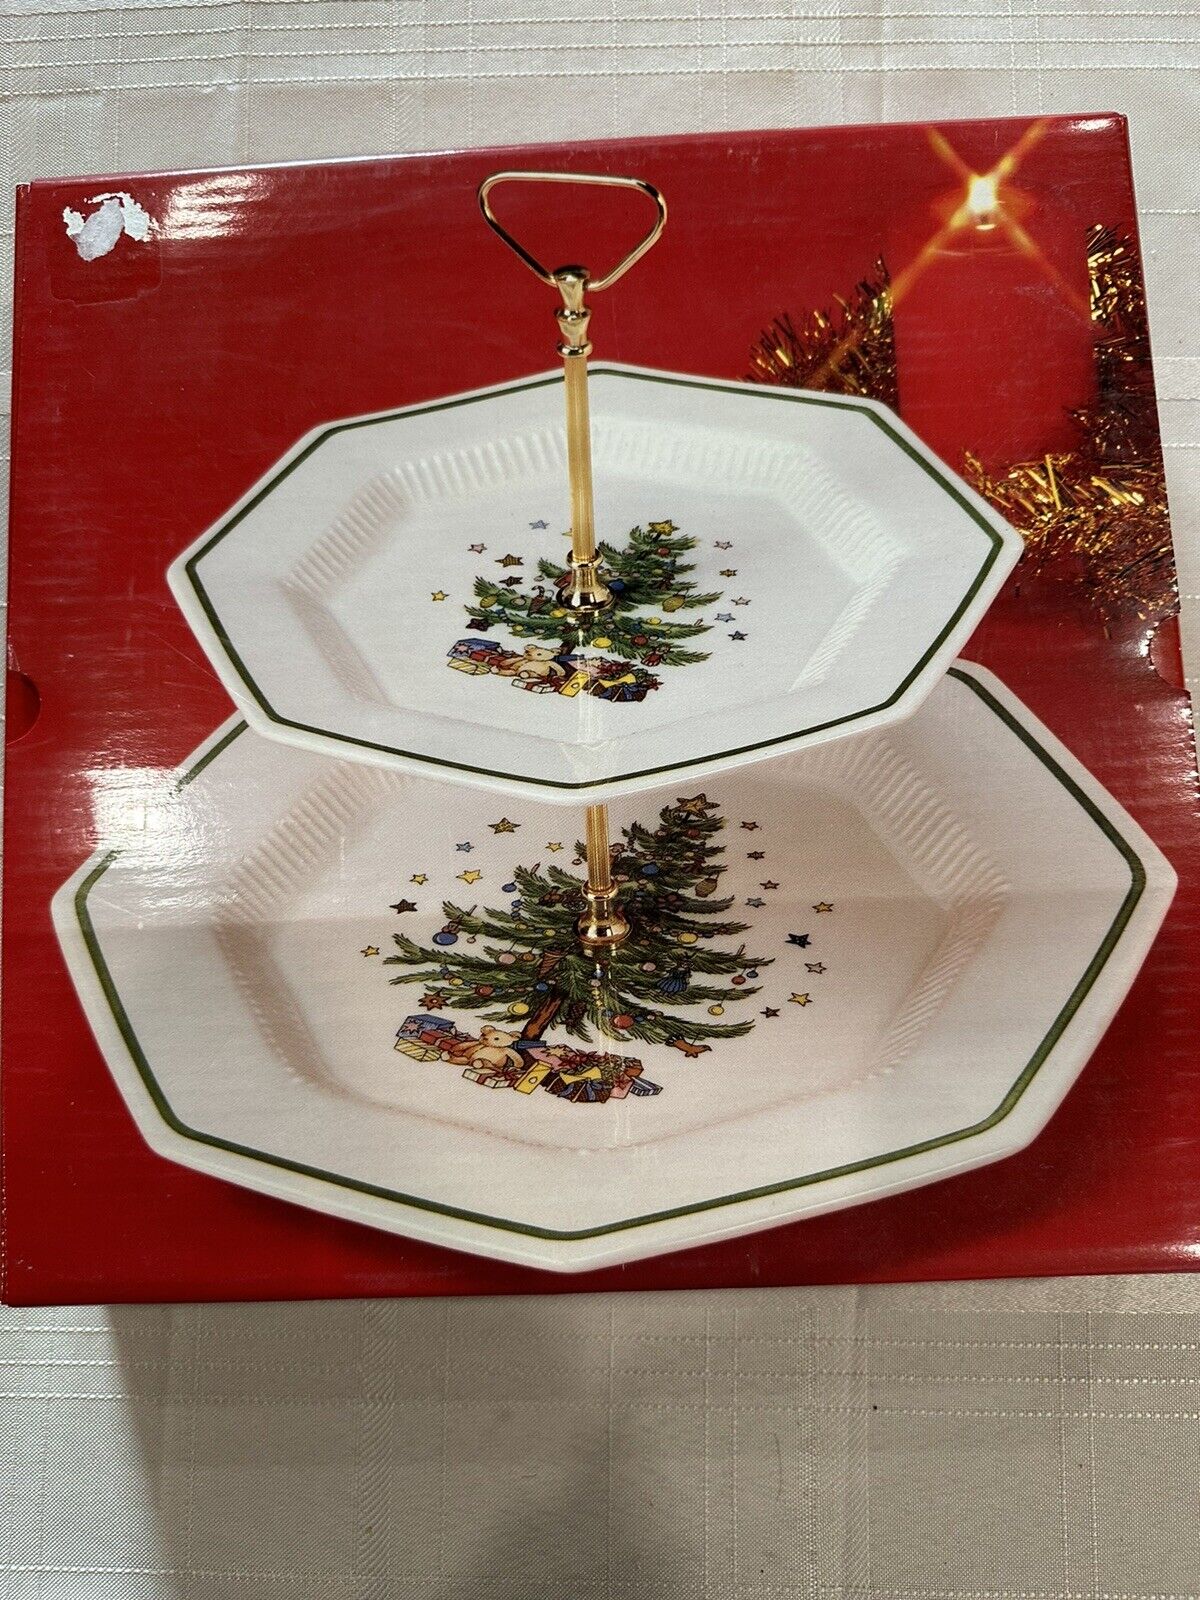 Nikko Christmastime Octagon Two Tier Tray, Made in Japan Xmas Holiday